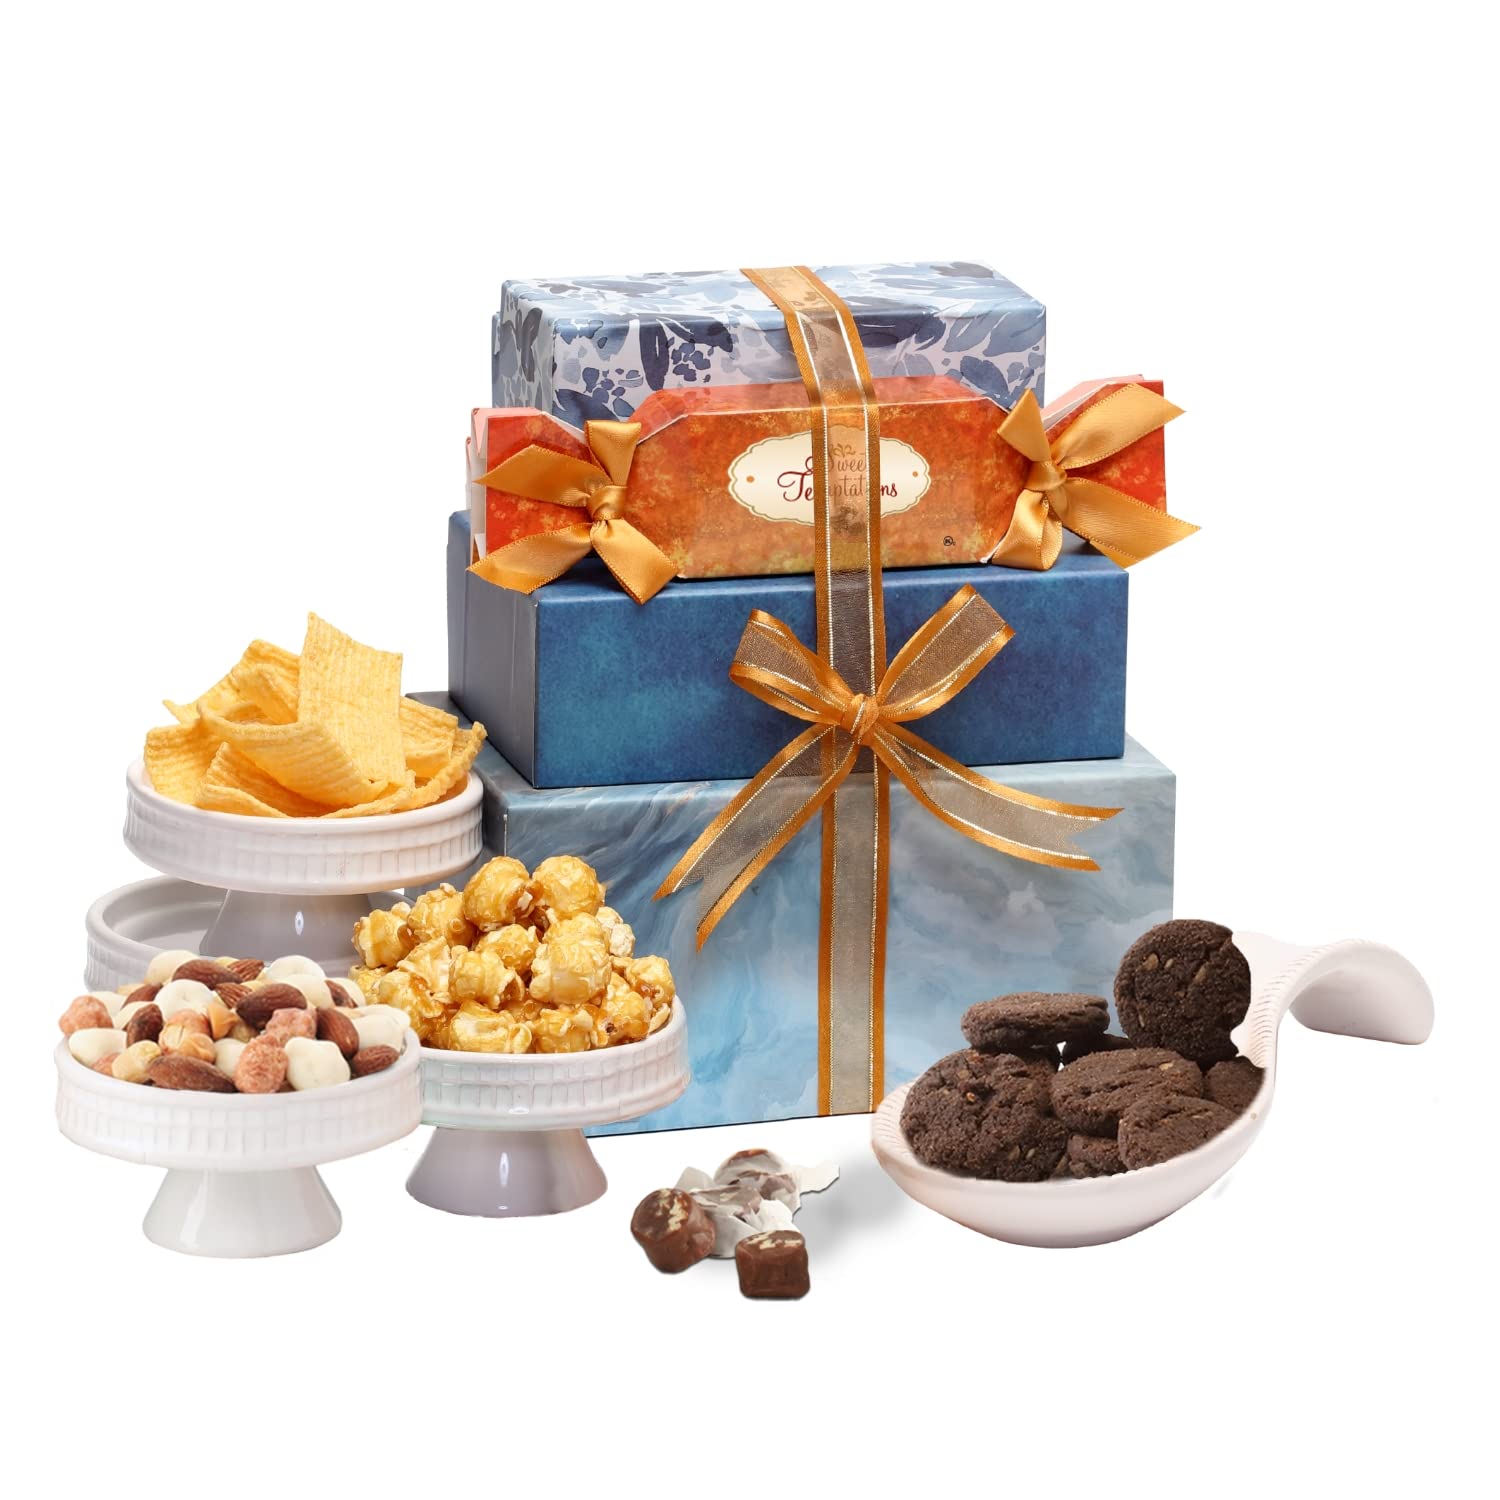 thinking of you assorted candy gift box - unique sympathy gift ideas  candies basket for adults, llege students, men or women, kids, teens 